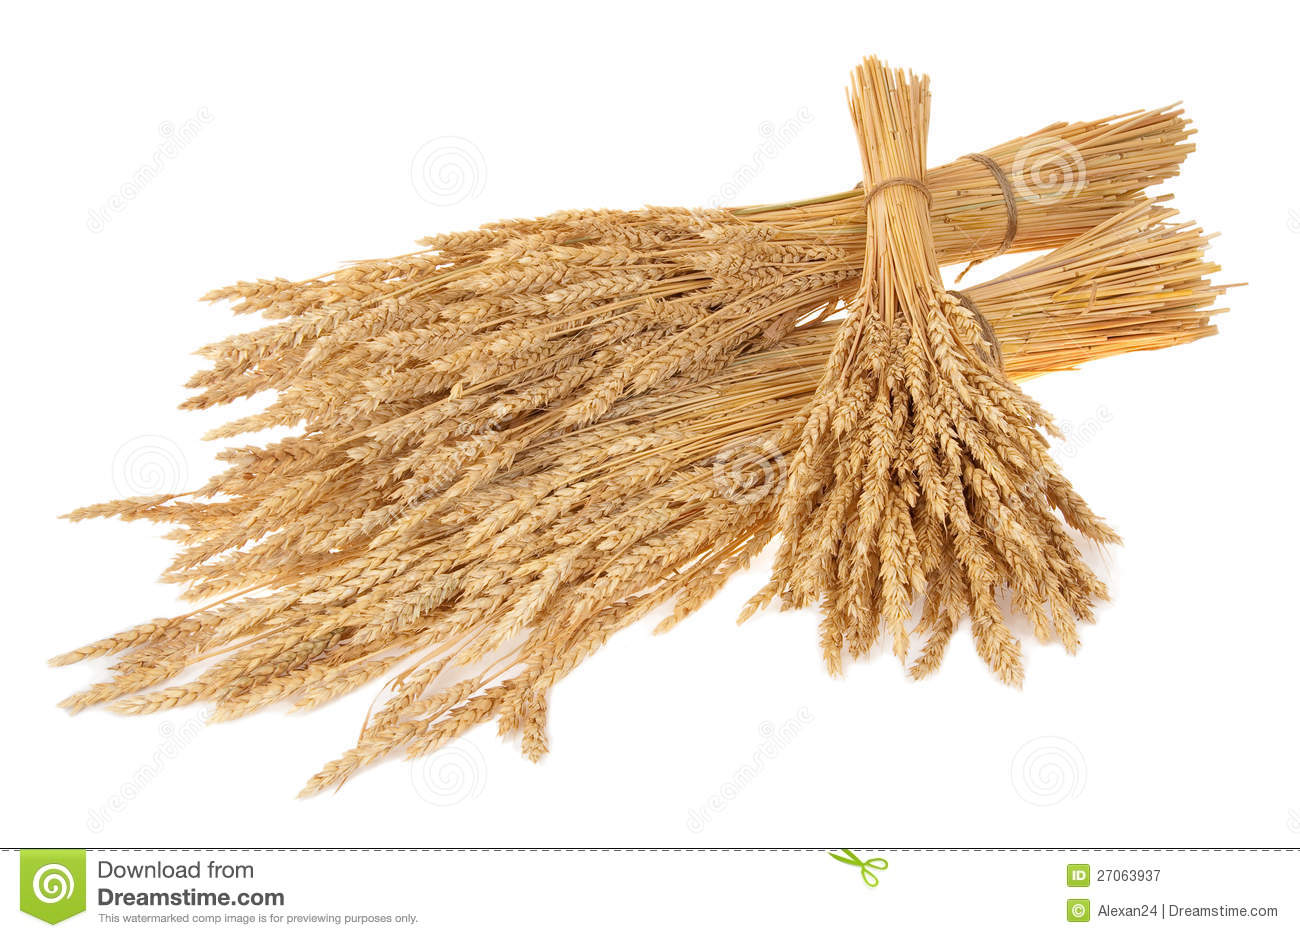 Sheaves Of Wheat Royalty Free Stock Photography   Image  27063937